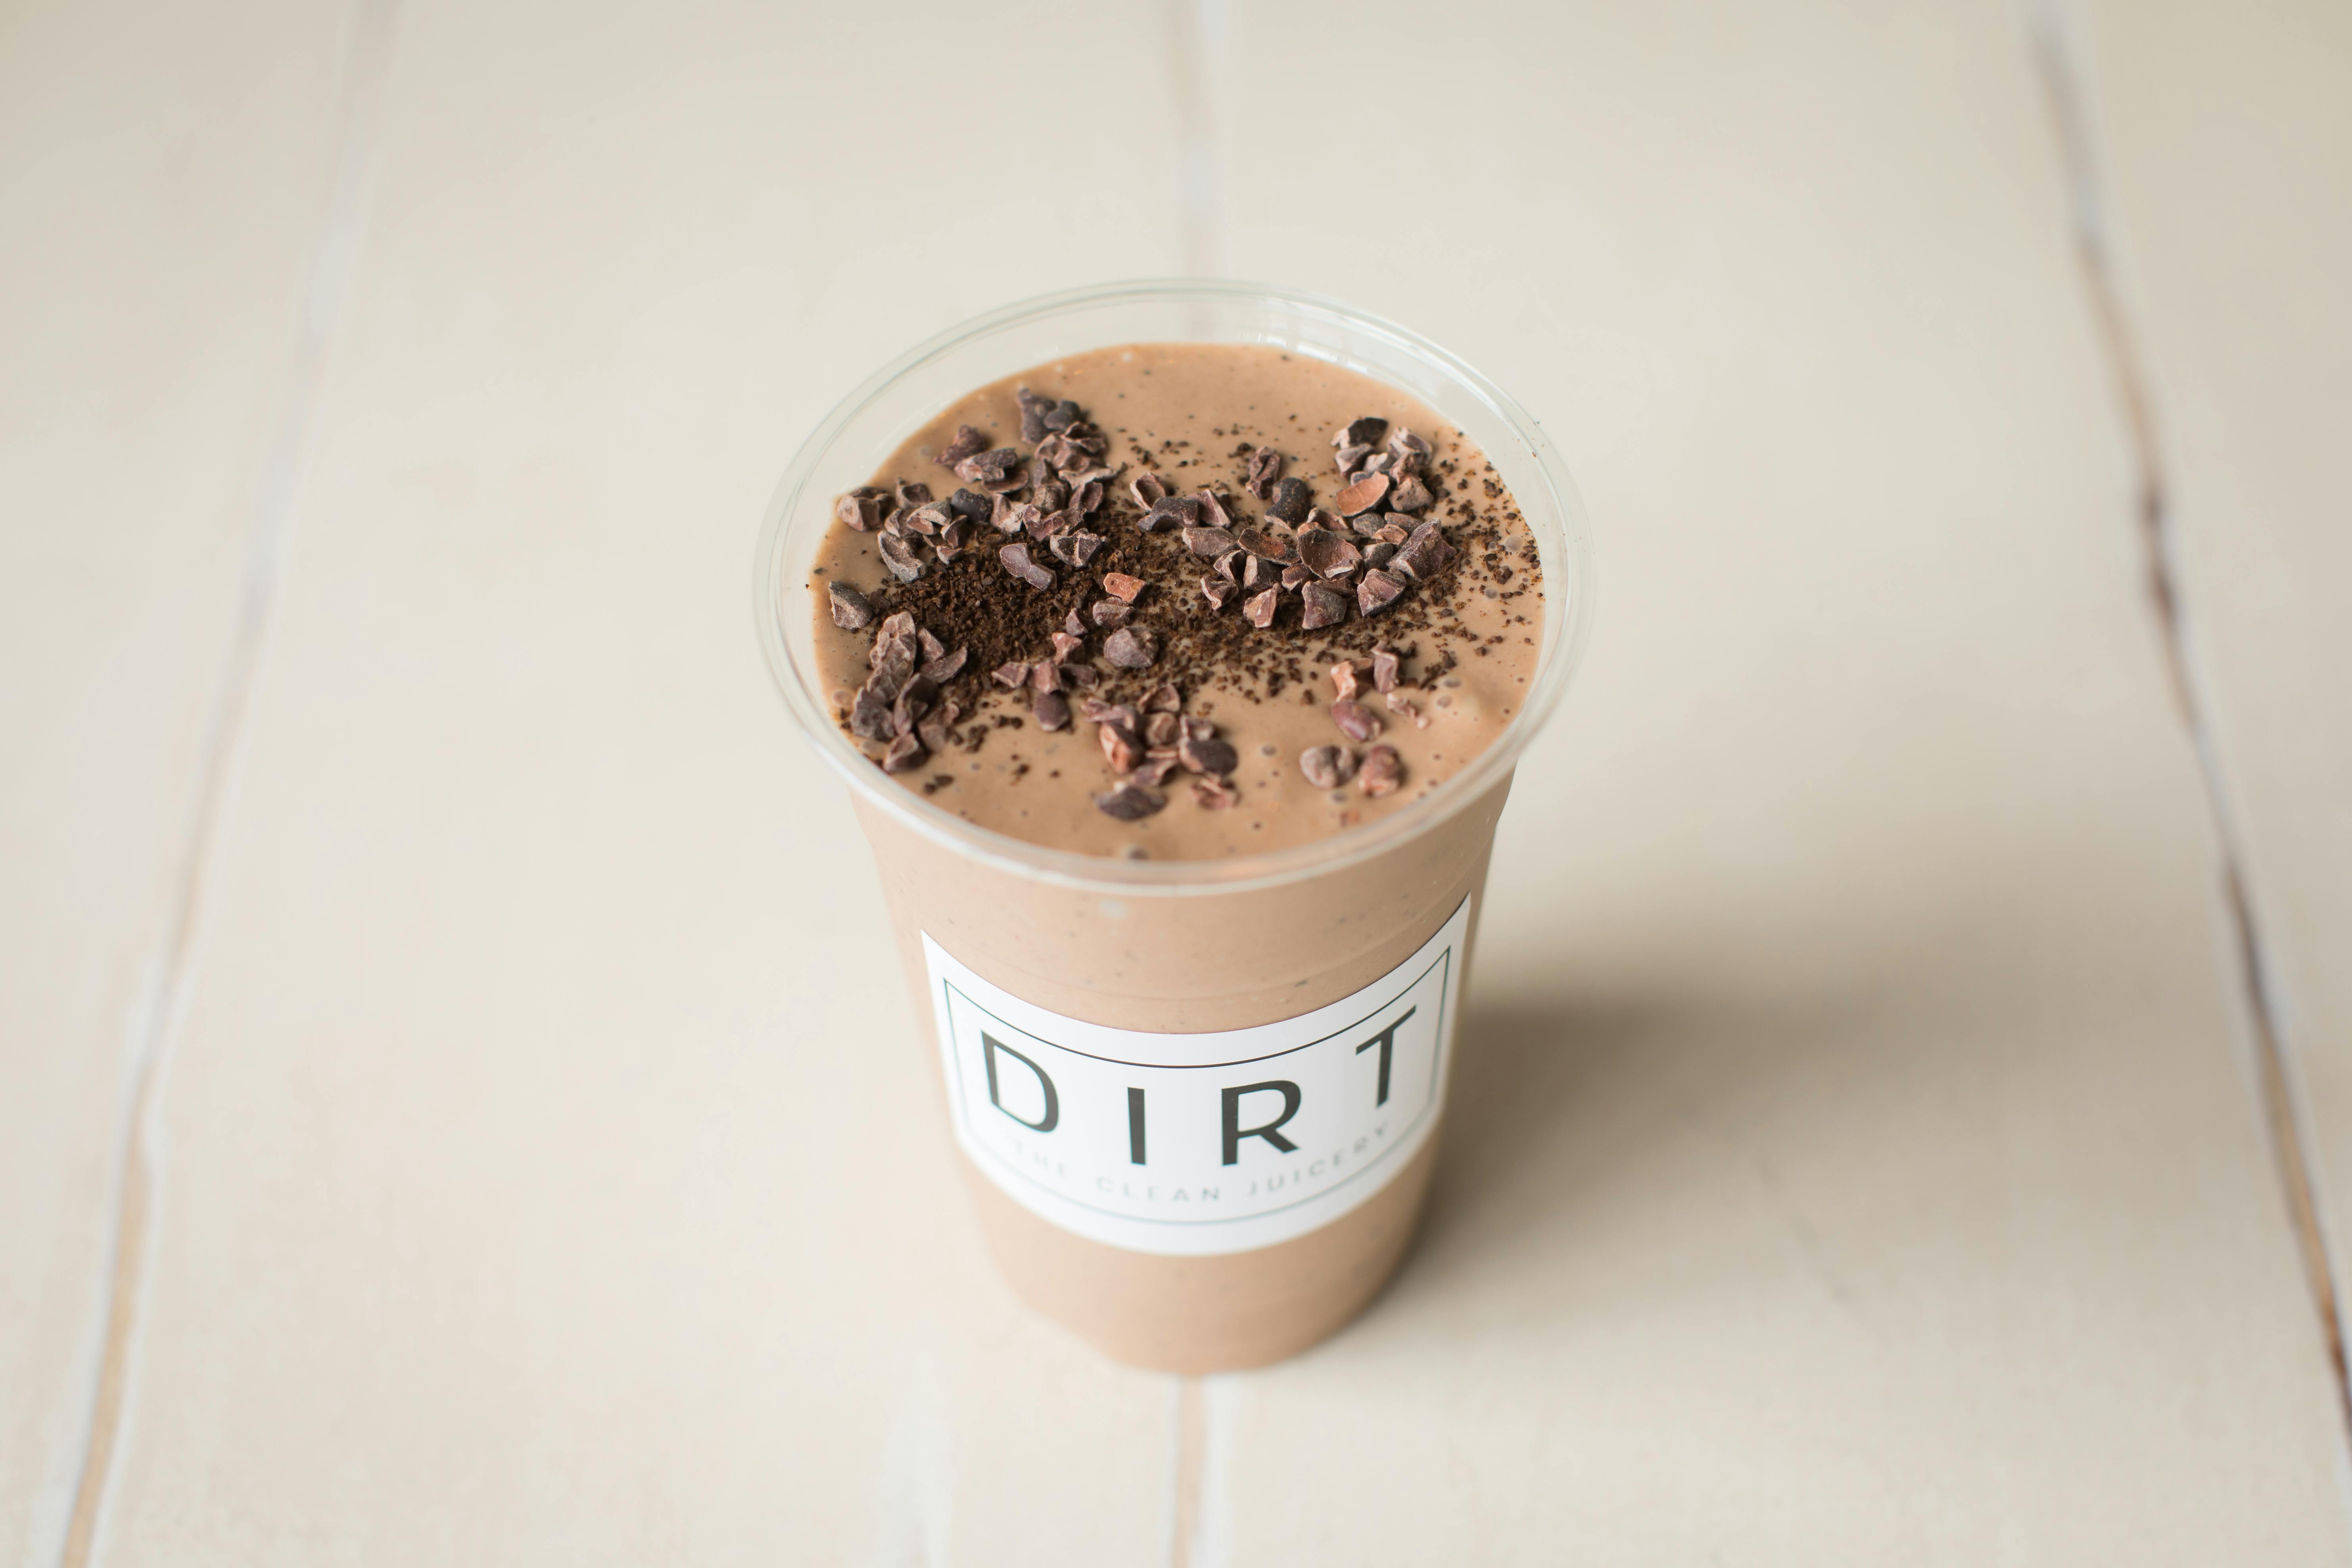 Chunky Monkey Moringa Smoothie from Dirt Juicery - Bay Park Square in Green Bay, WI